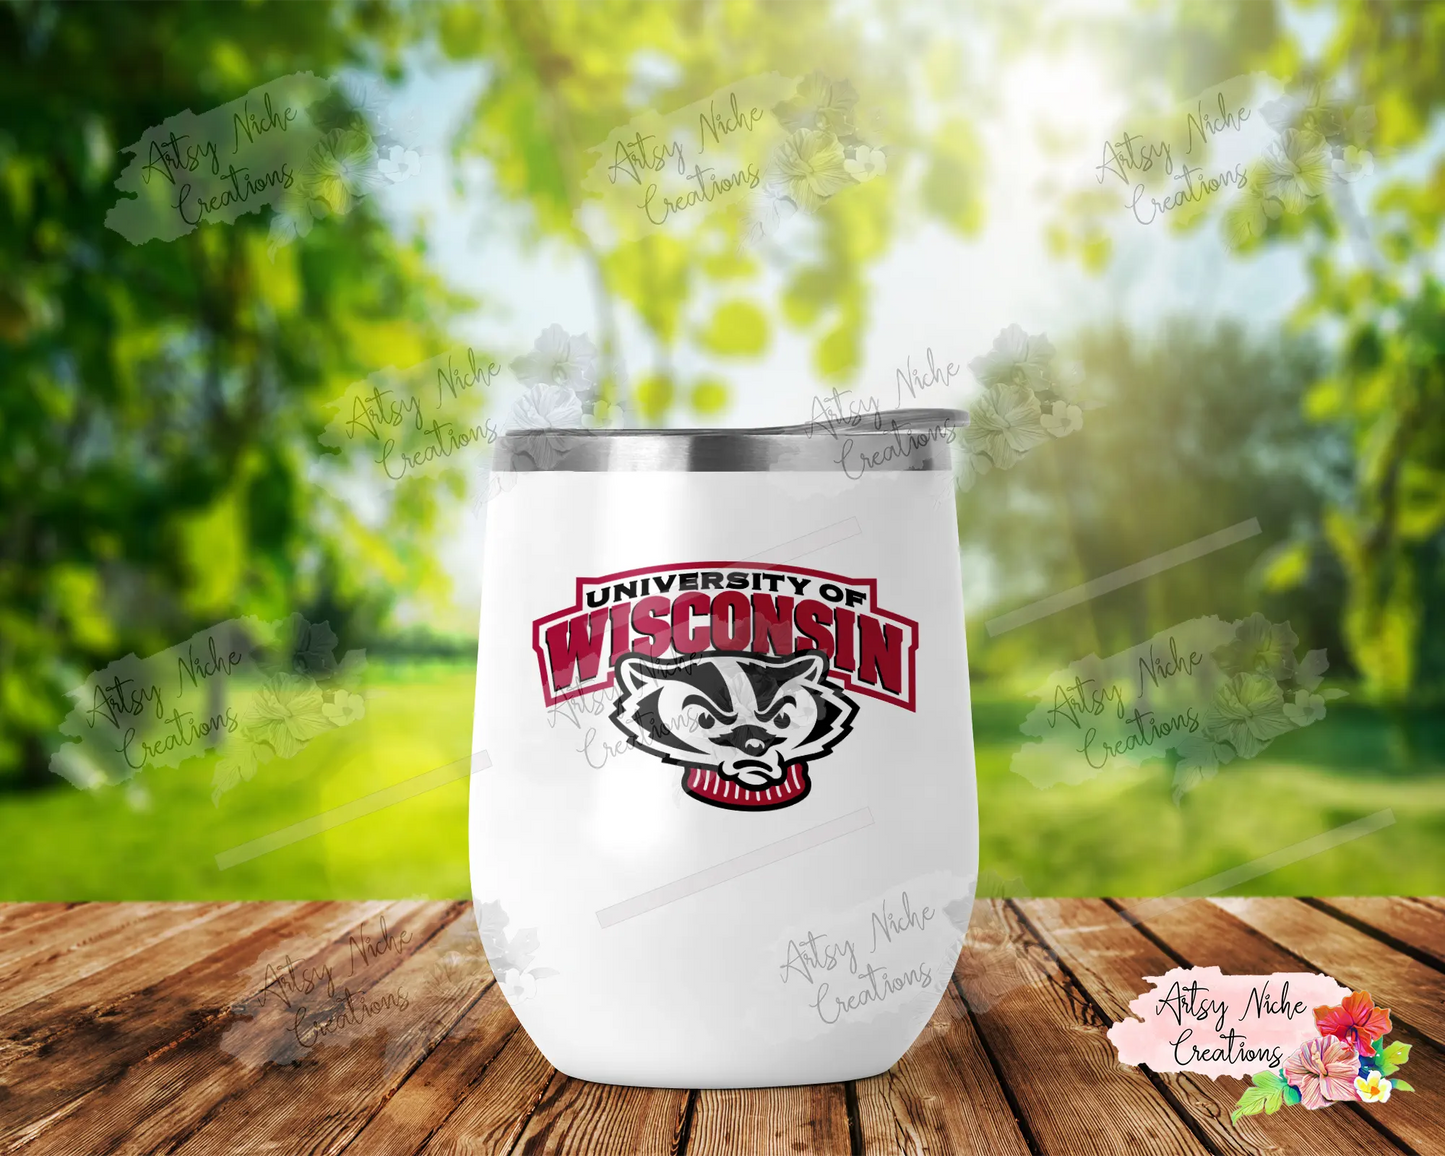 12 oz Sublimation Wine Tumbler University of Wisconsin - Imperfect – Artsy  Niche Creations